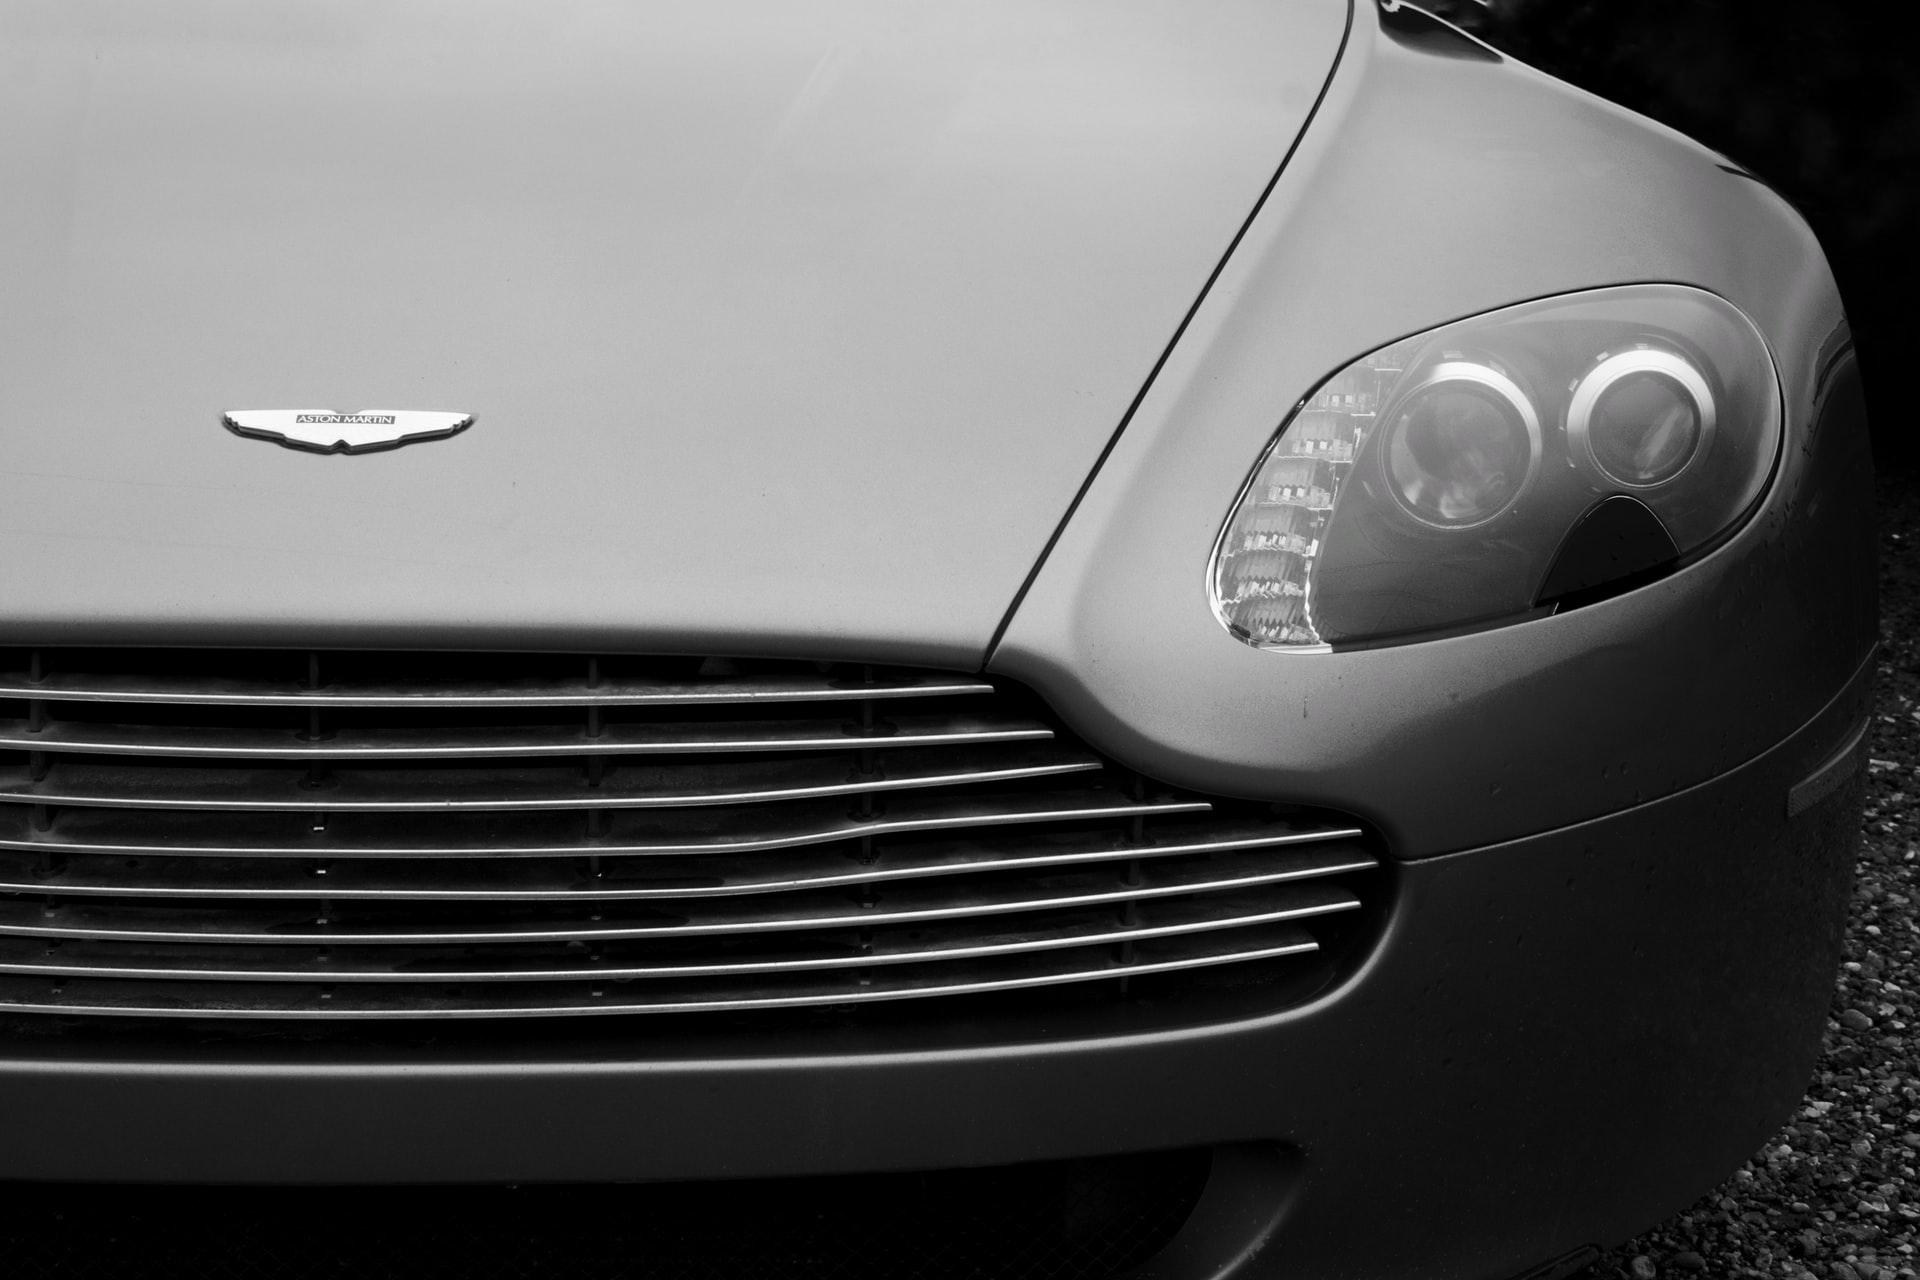 Aston Martins made their debut in the 007 movies in the film “Goldfinger” starring Sean Connery.